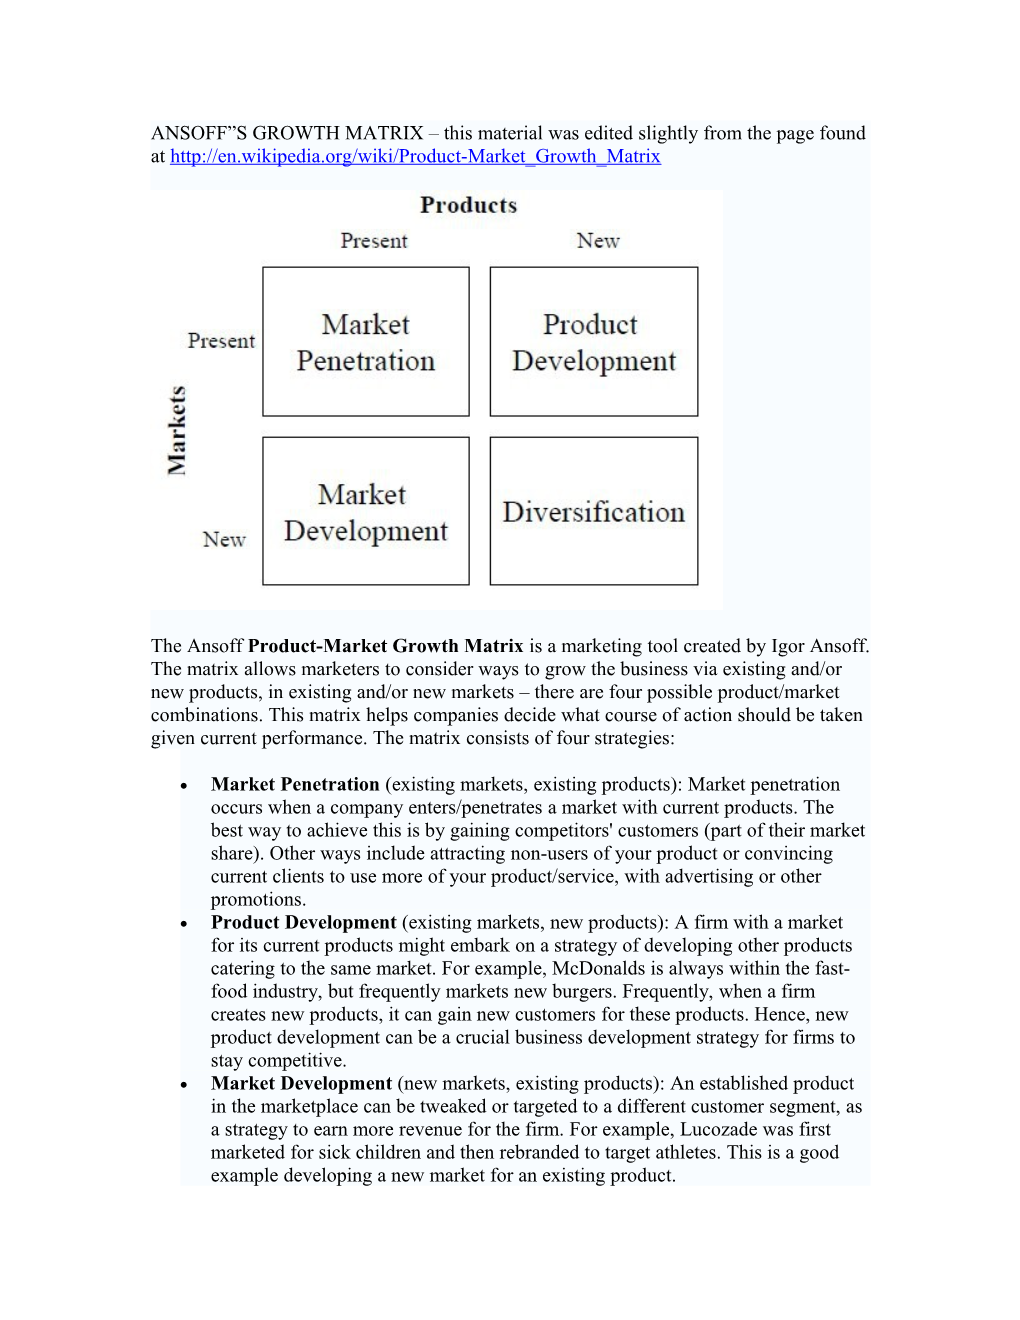 ANSOFF S GROWTH MATRIX This Material Was Edited Slightly from the Page Found At